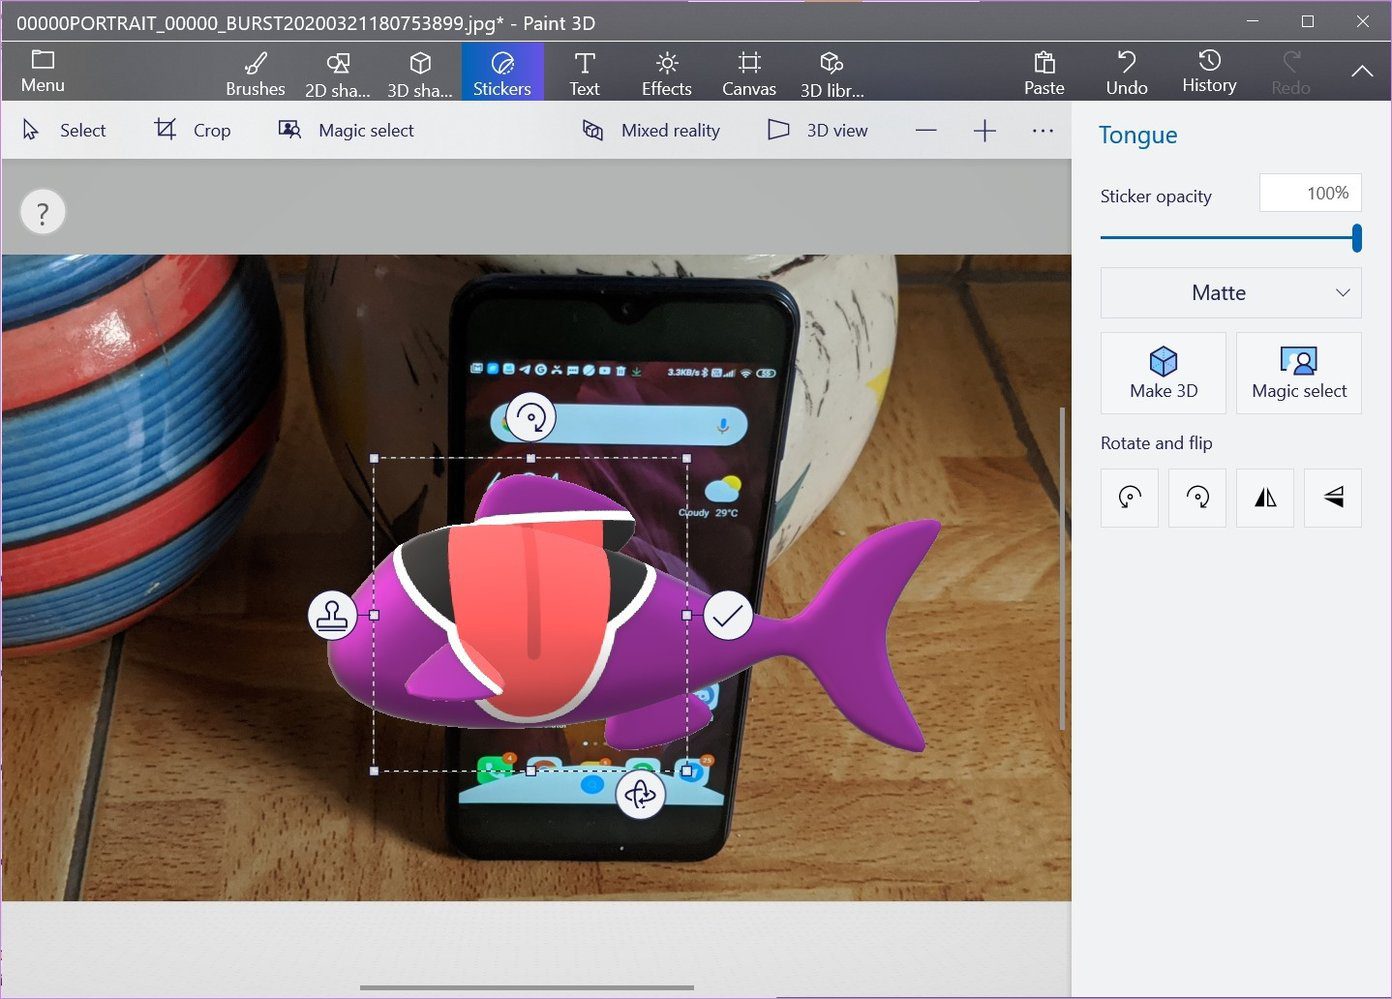 How to use paint 3d to edit photos 18